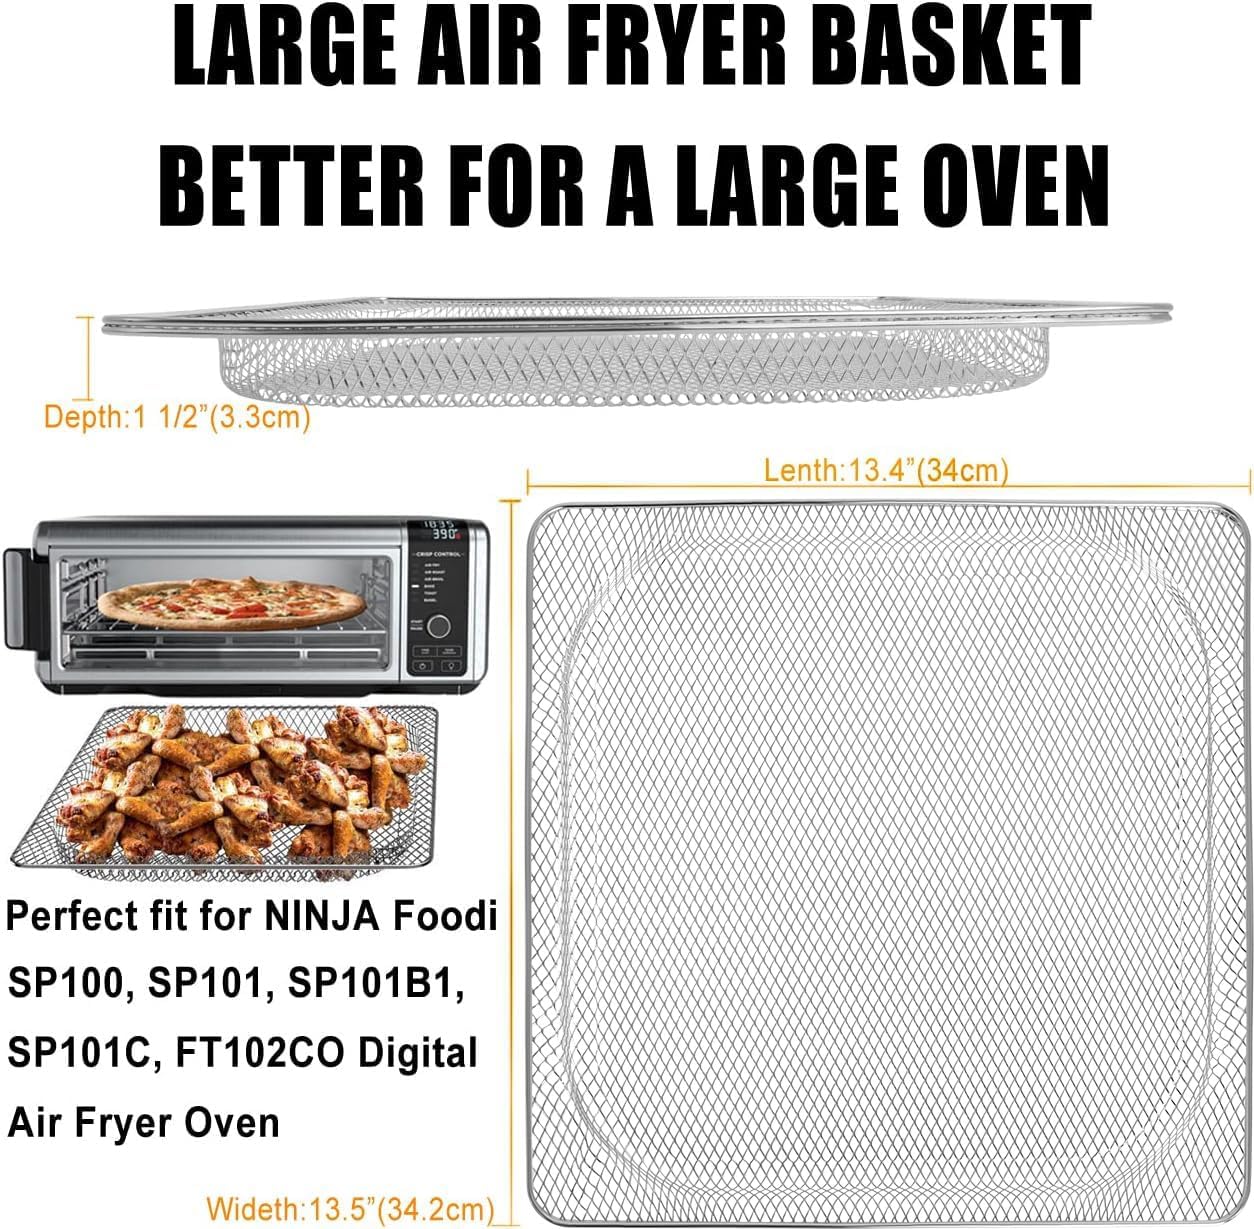 Air Fryer Oven Vs Air Fryer Basket- Which Is Better